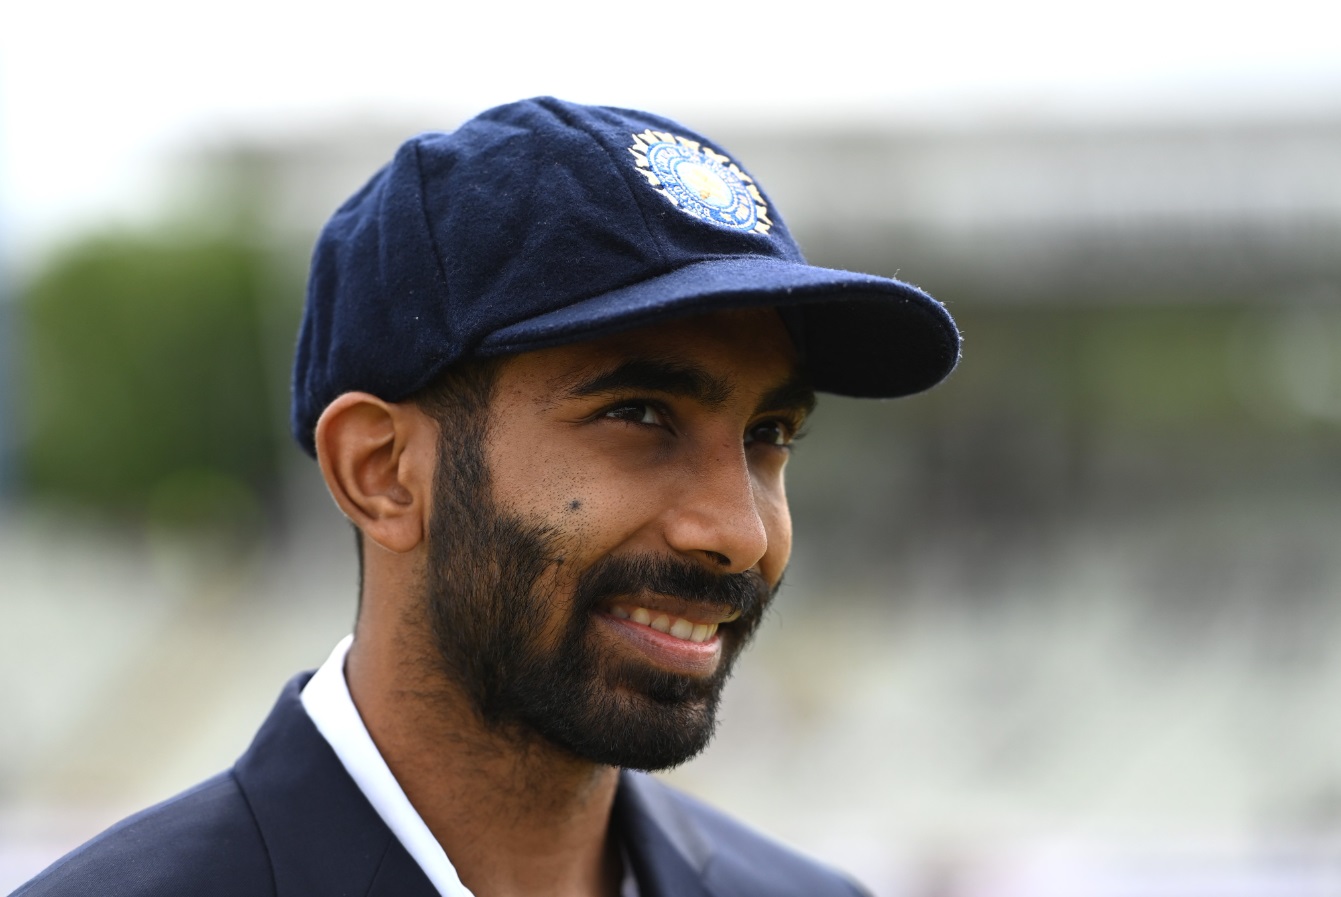 Jasprit Bumrah at the peak of his prowess, brings a different edge, believes Sanjay Bangar